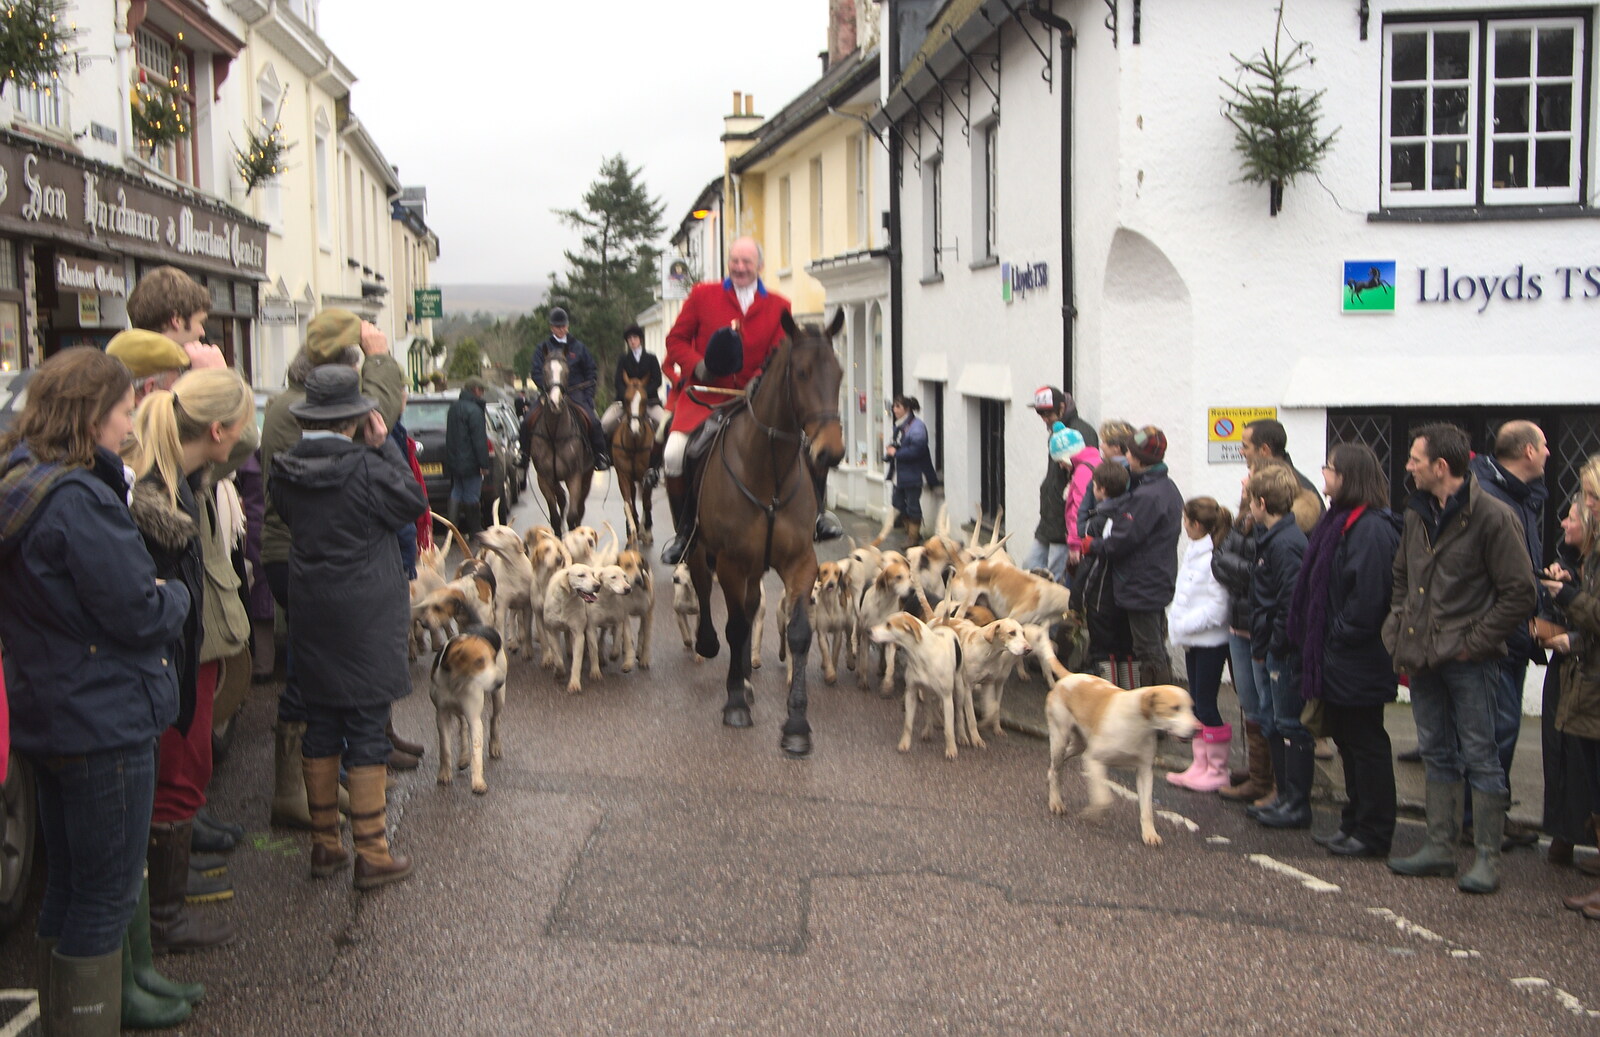 The hounds ride in from Mill Street from The Boxing Day Hunt, Chagford, Devon - 26th December 2012